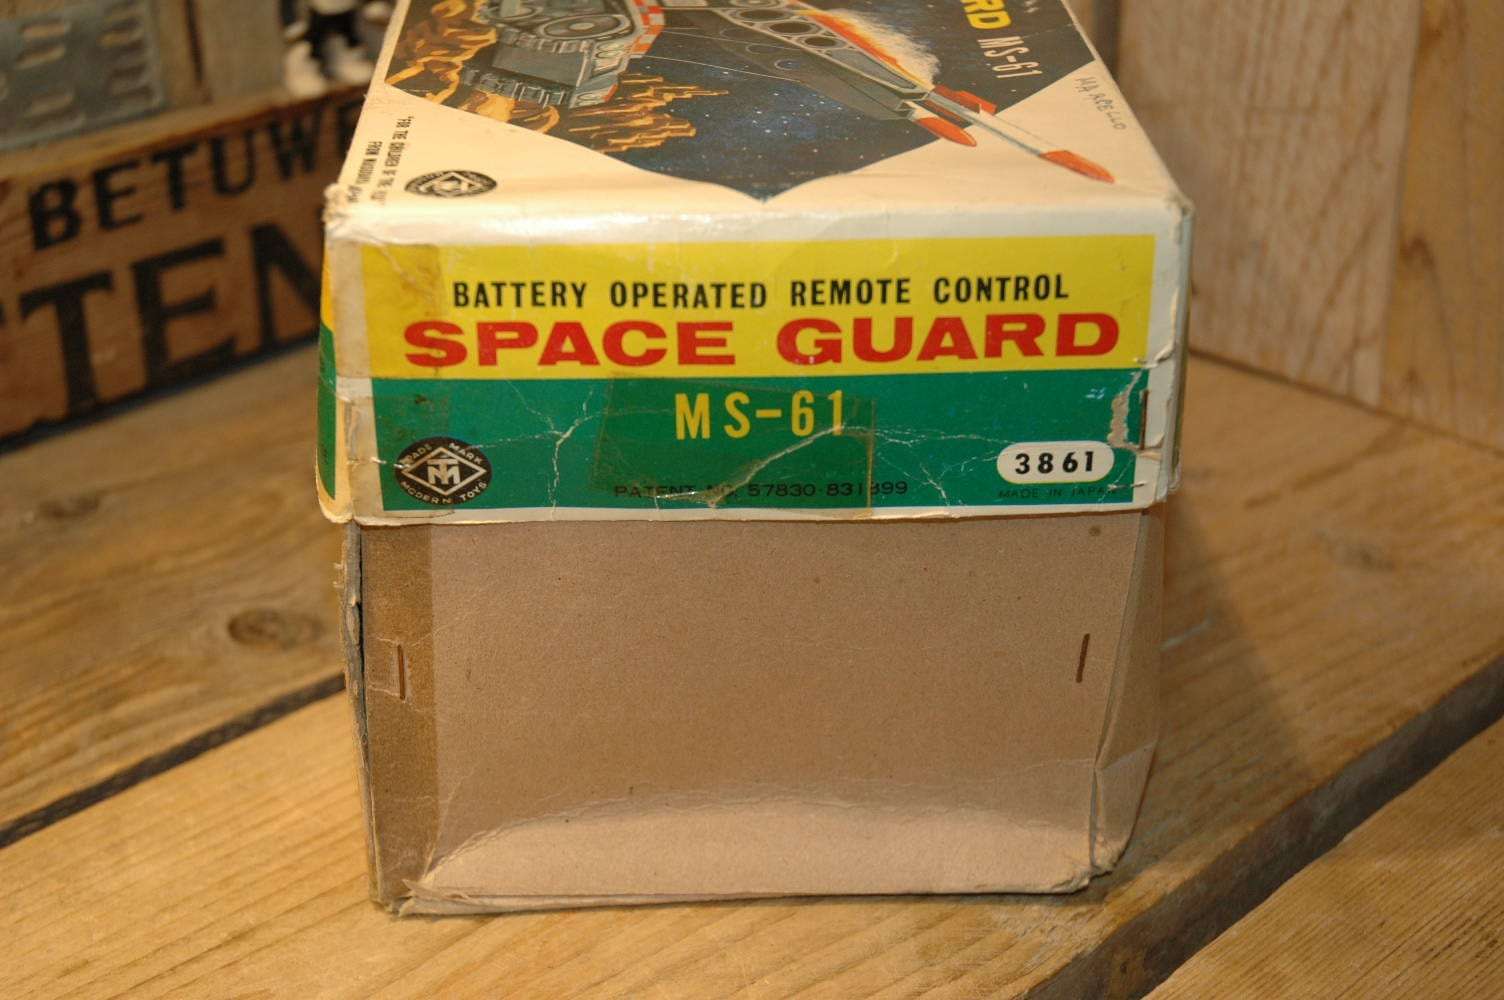 Modern Toys - Space Guard MS-61